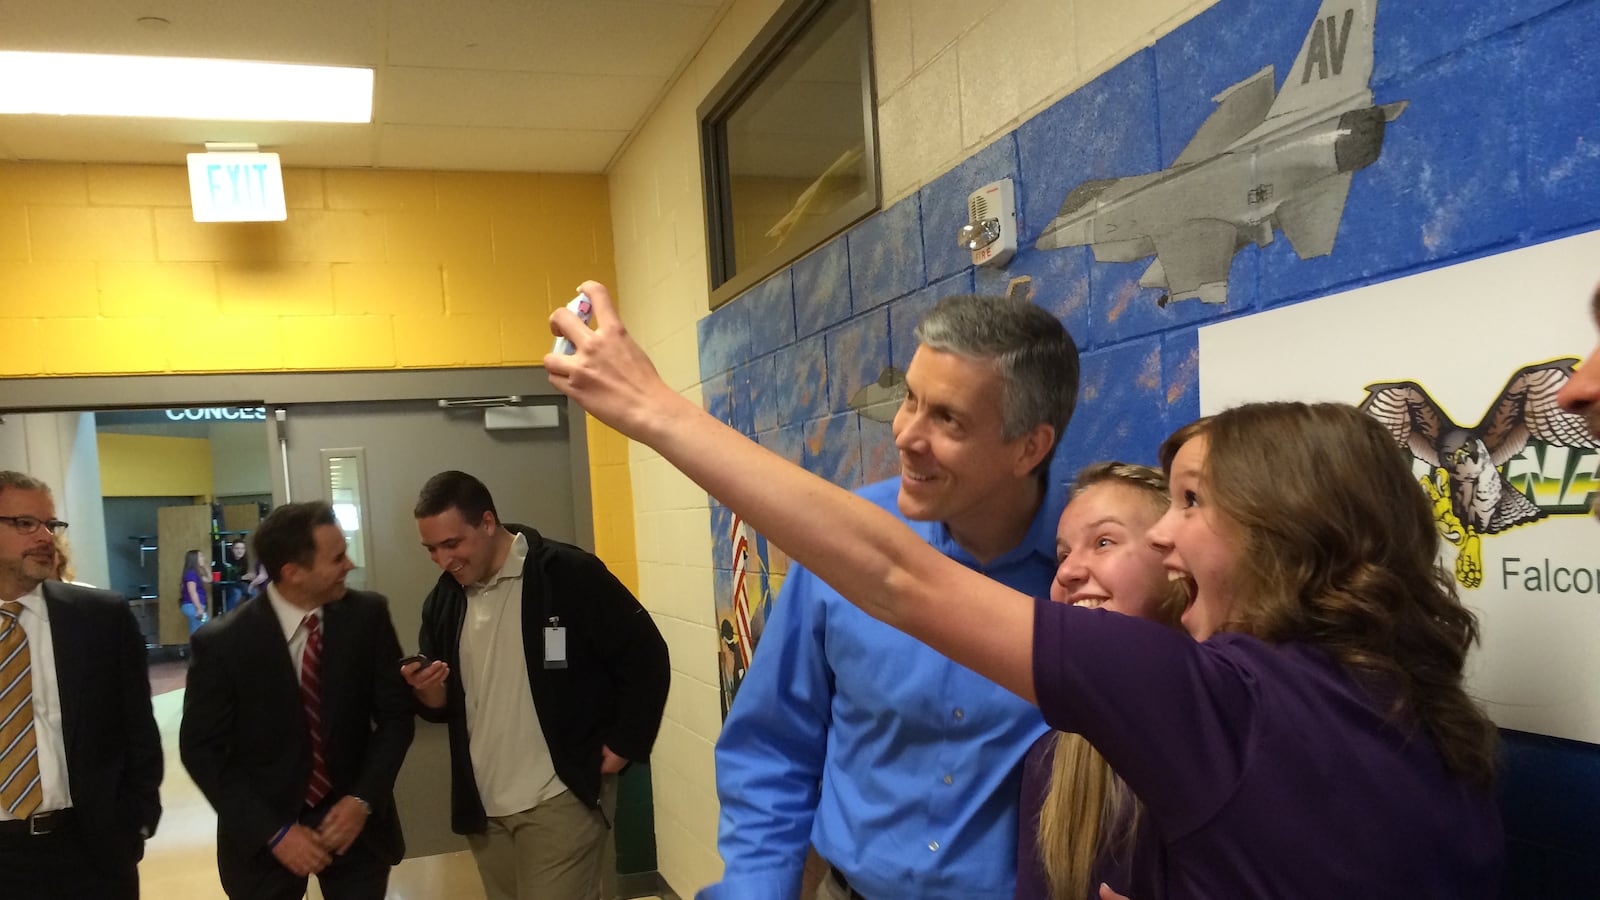 U.S. Secretary of Education Arne Duncan posed for a selfie with students in Colorado Springs last year.